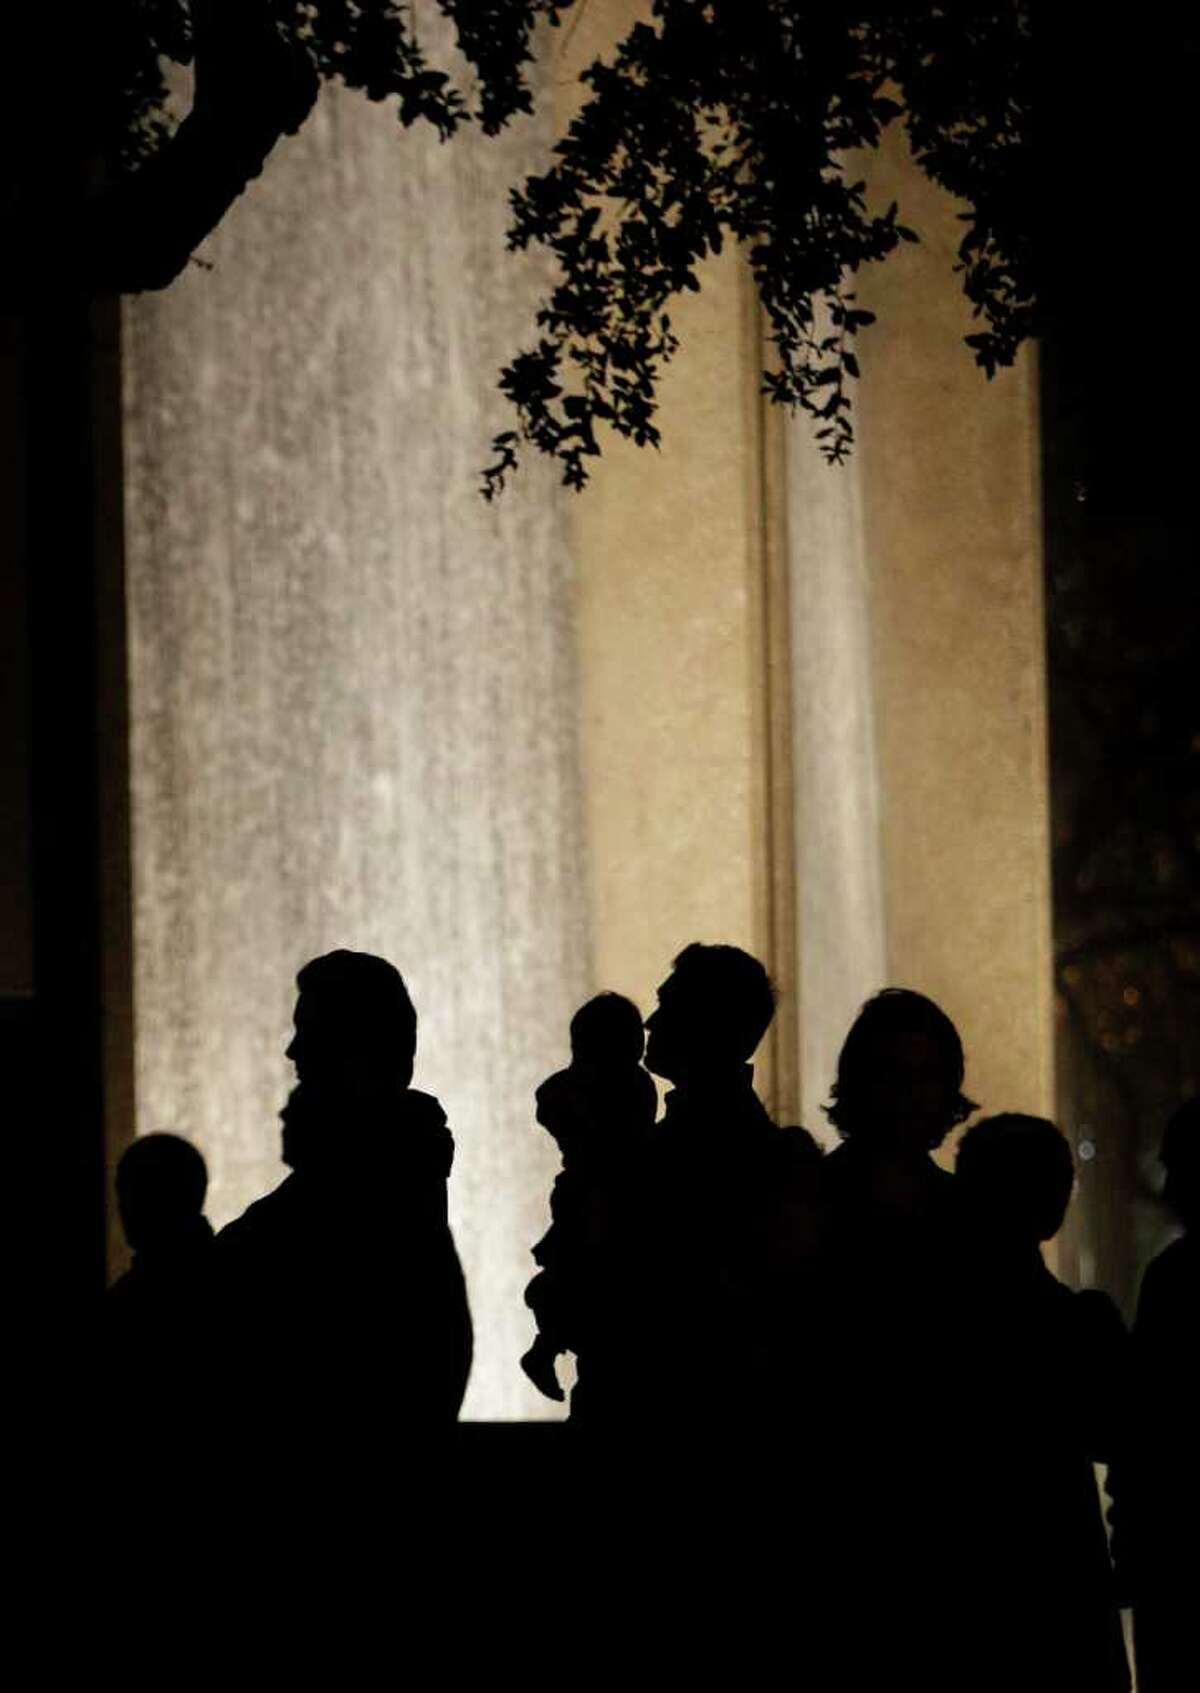 People gather at the Water Wall near the Galleria in vigil for Gelareh Bagherzadeh, who was killed Monday, Jan. 16, 2012, in Houston. The 30-year-old female student at the Texas Medical Center was found shot to death in a car at a residence in the 800 block of Augusta near Sugar Hill near the Galleria early Monday morning.